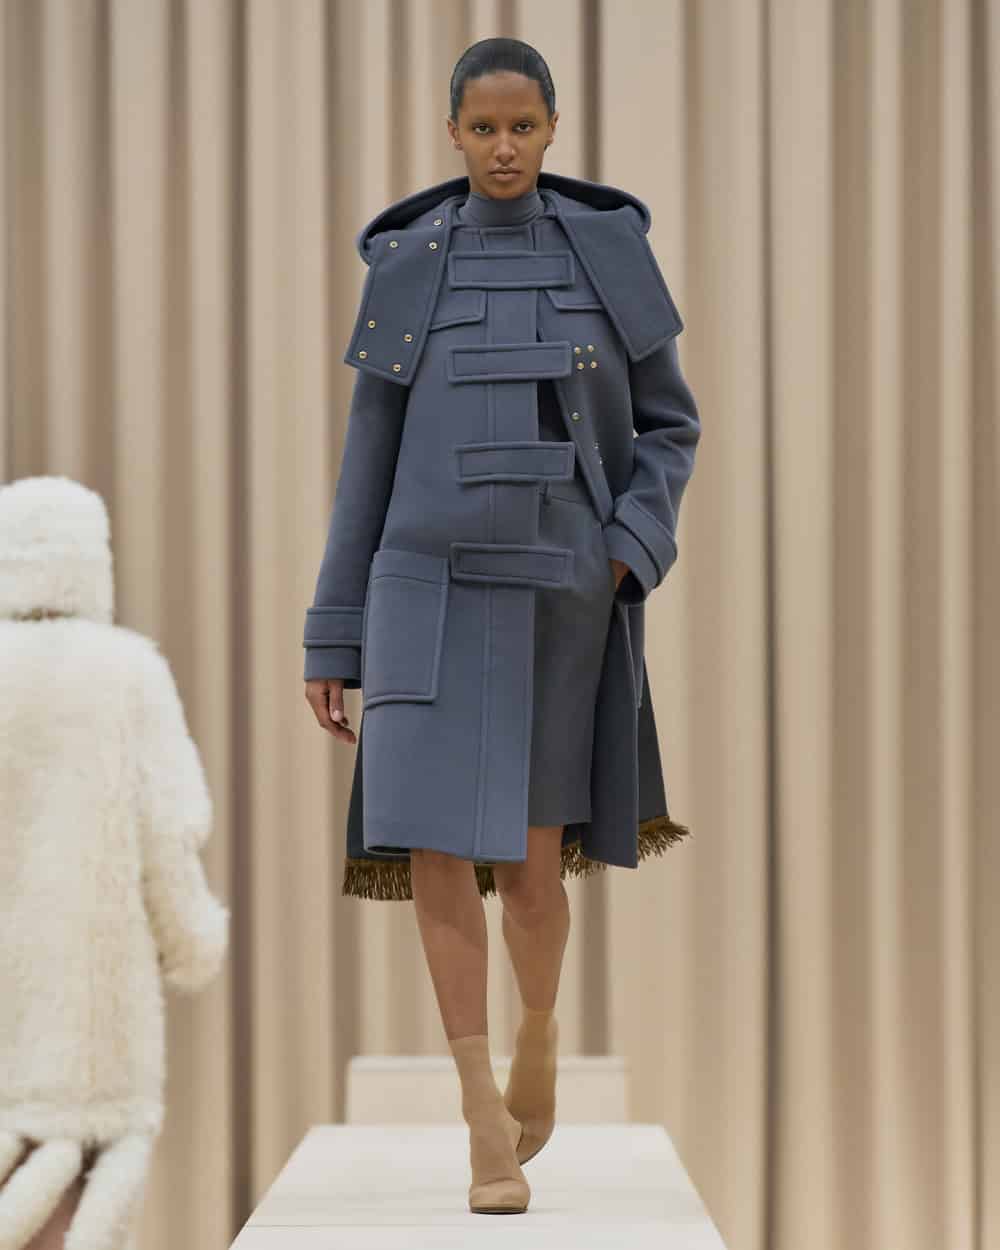 Riccardo Tisci Was Inspired By His Single Mom For Burberry FW '21